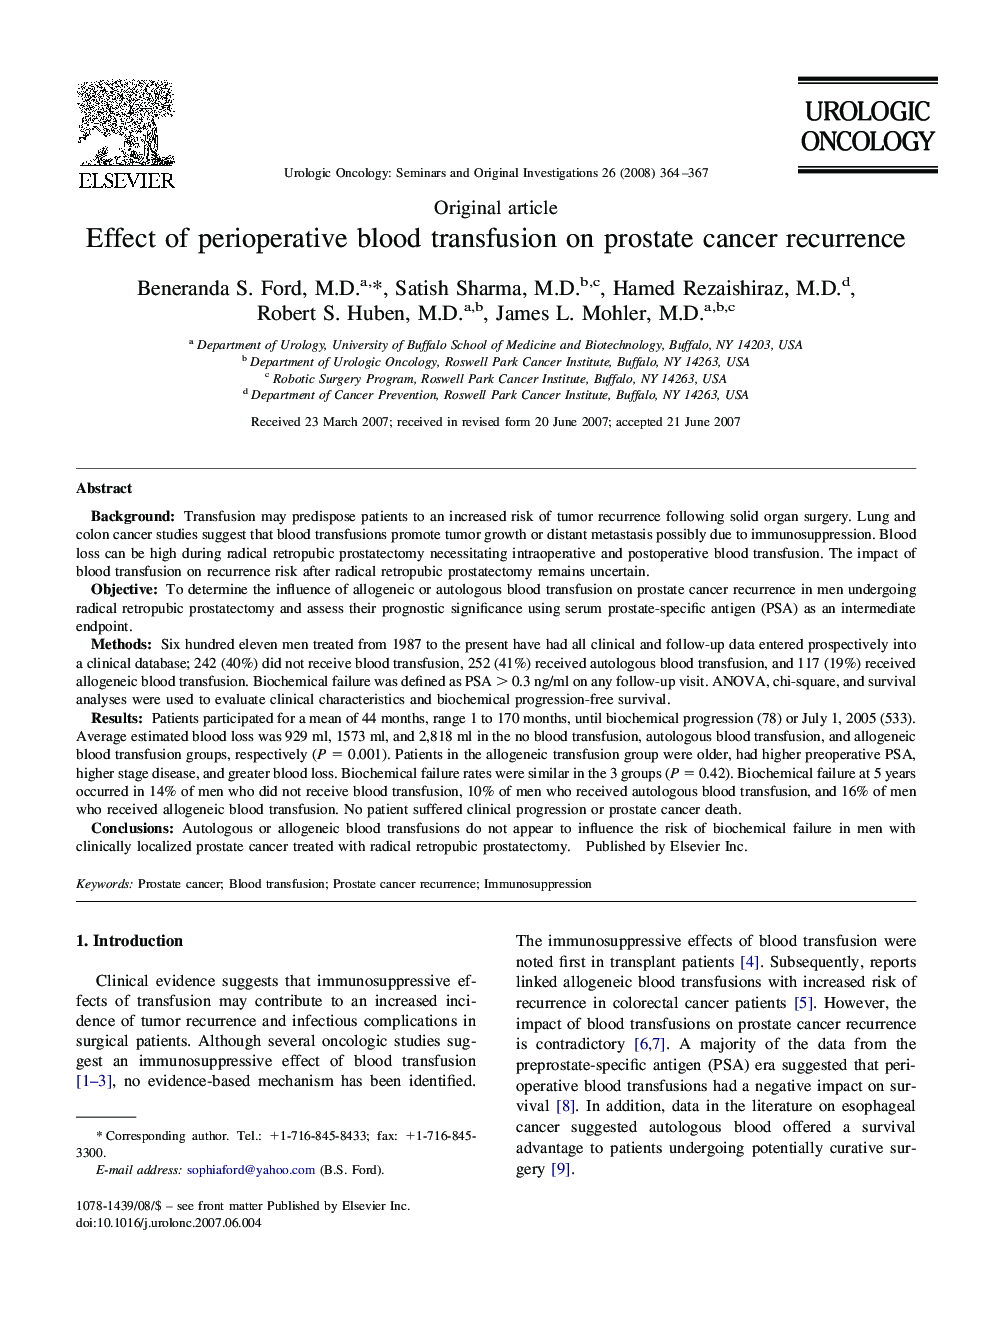 Effect of perioperative blood transfusion on prostate cancer recurrence